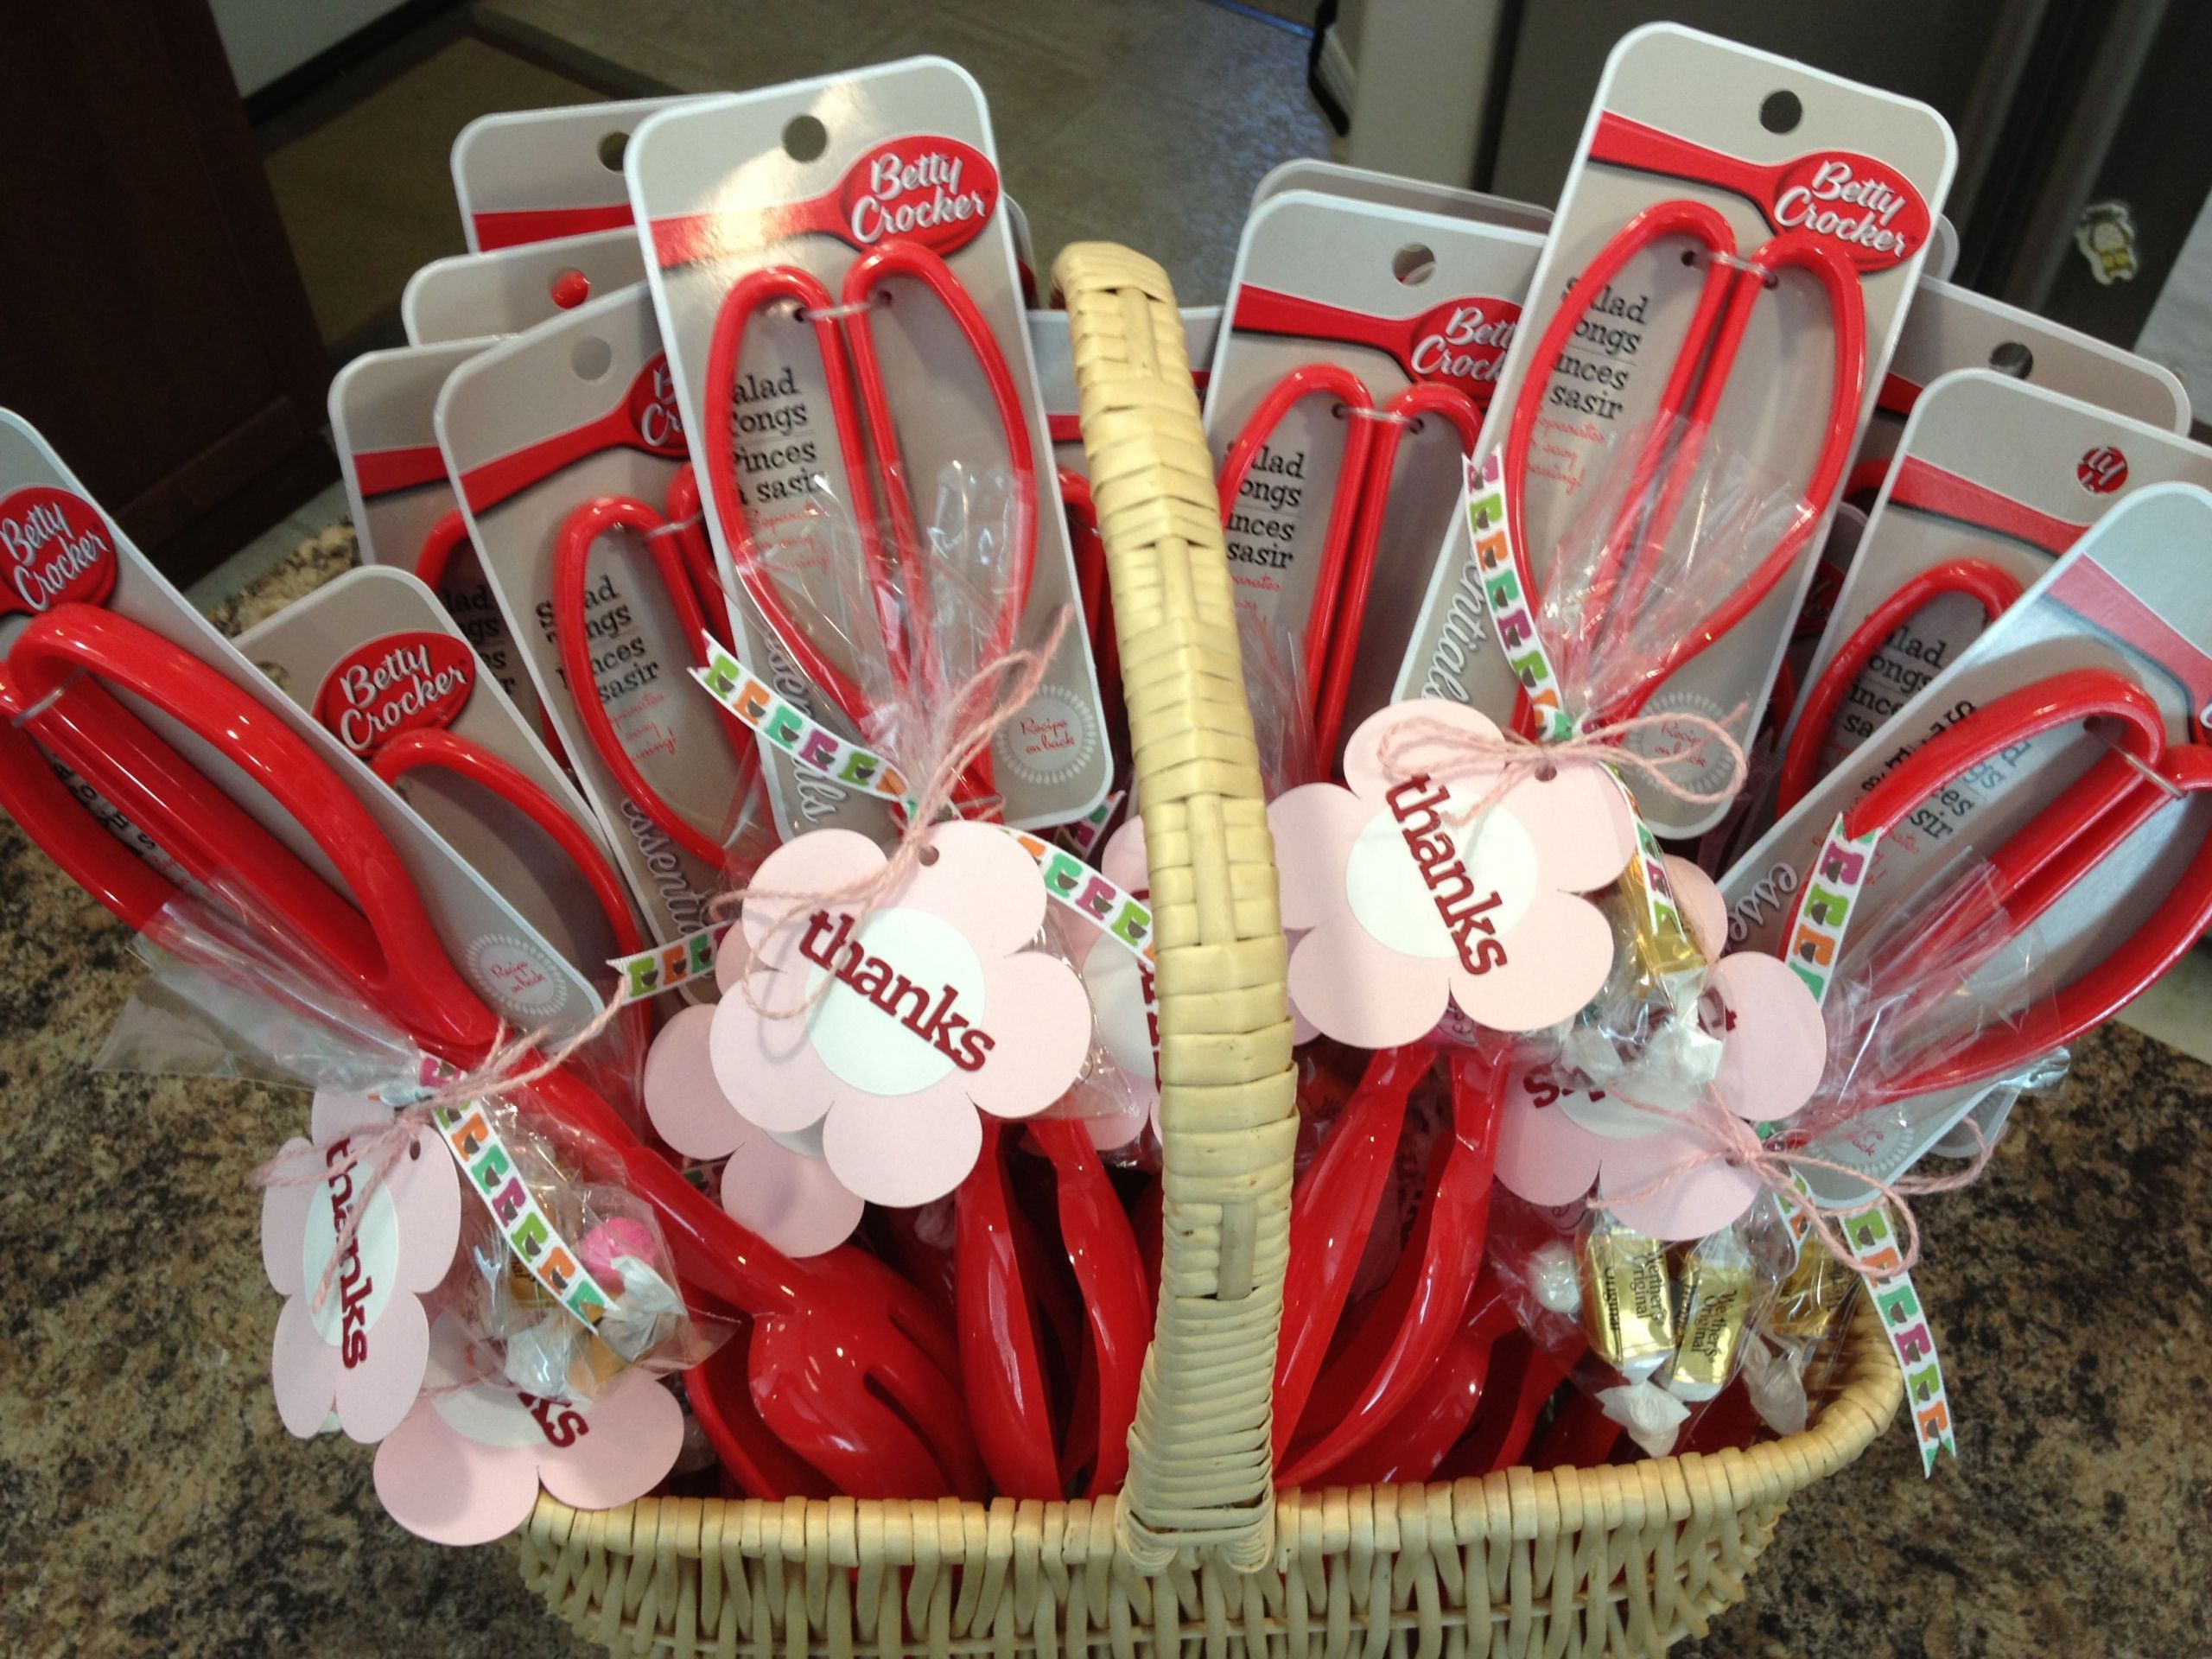 Bridal Shower Thank You Gift Ideas
 Favors for kitchen themed bridal shower Salad tongs with